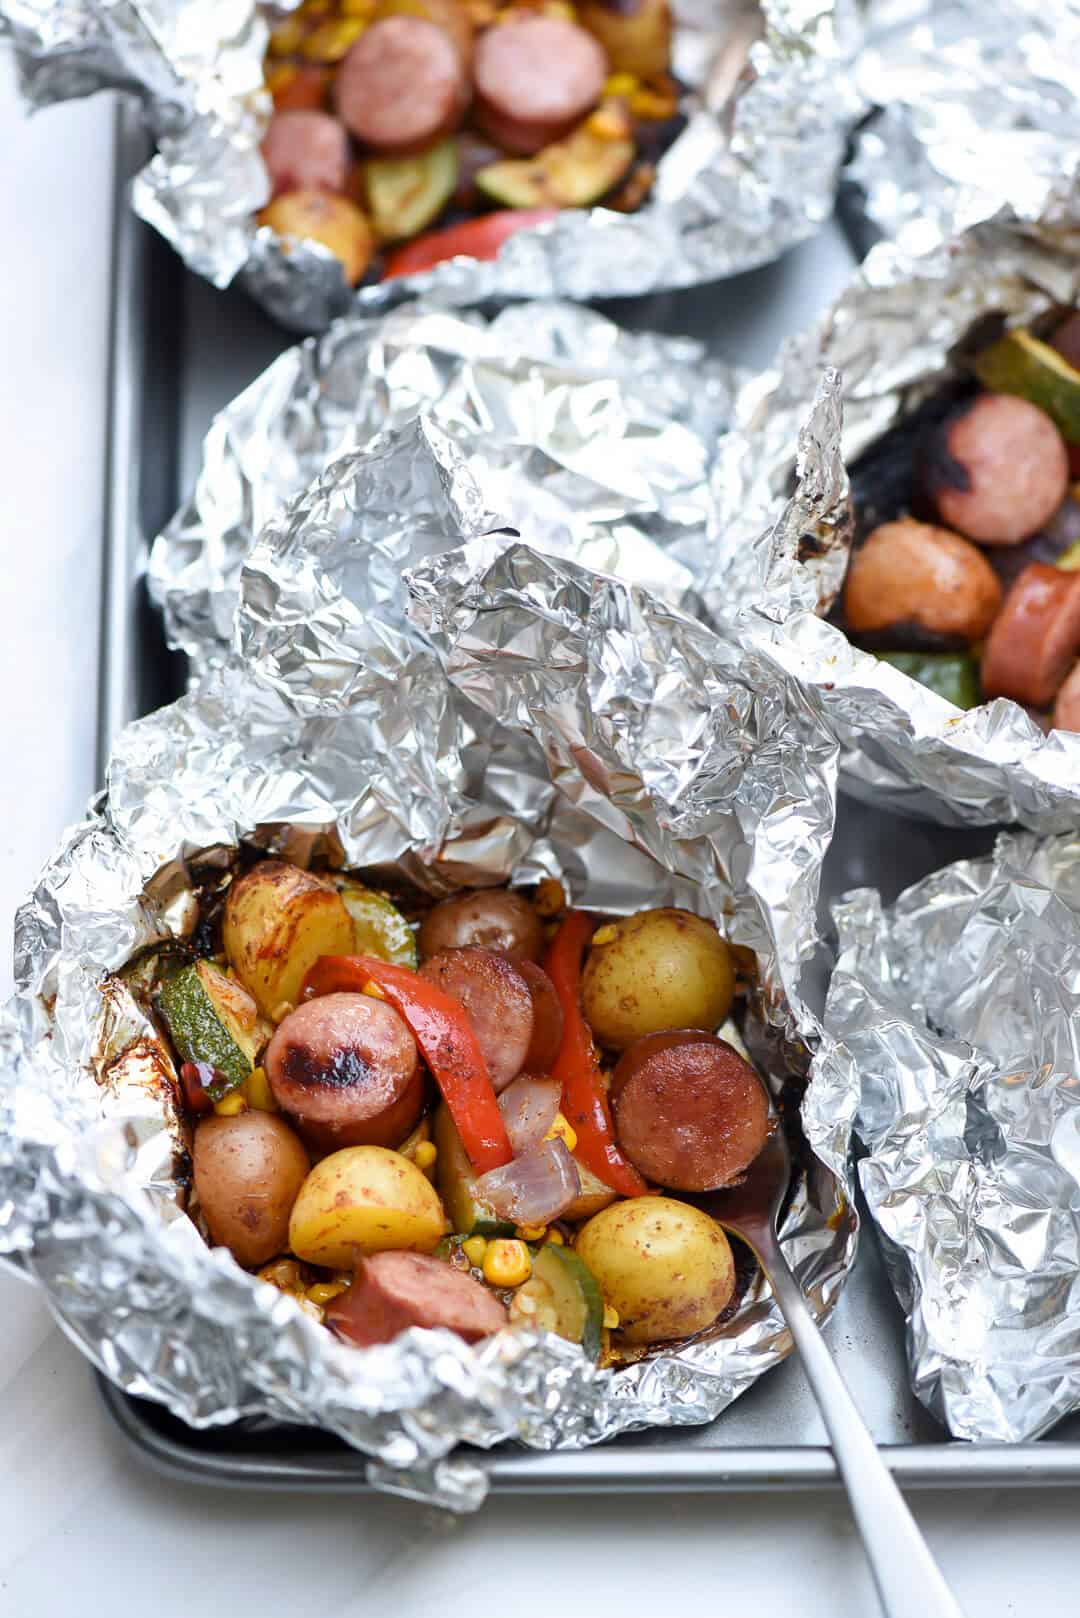 You just can't beat the foil pack method of cooking for an easy, stress-free summer meal. This Foil Pack Southwest Sausage and Potatoes takes just minutes to assemble, 15 minutes to cook, and cleanup is almost non-existent!